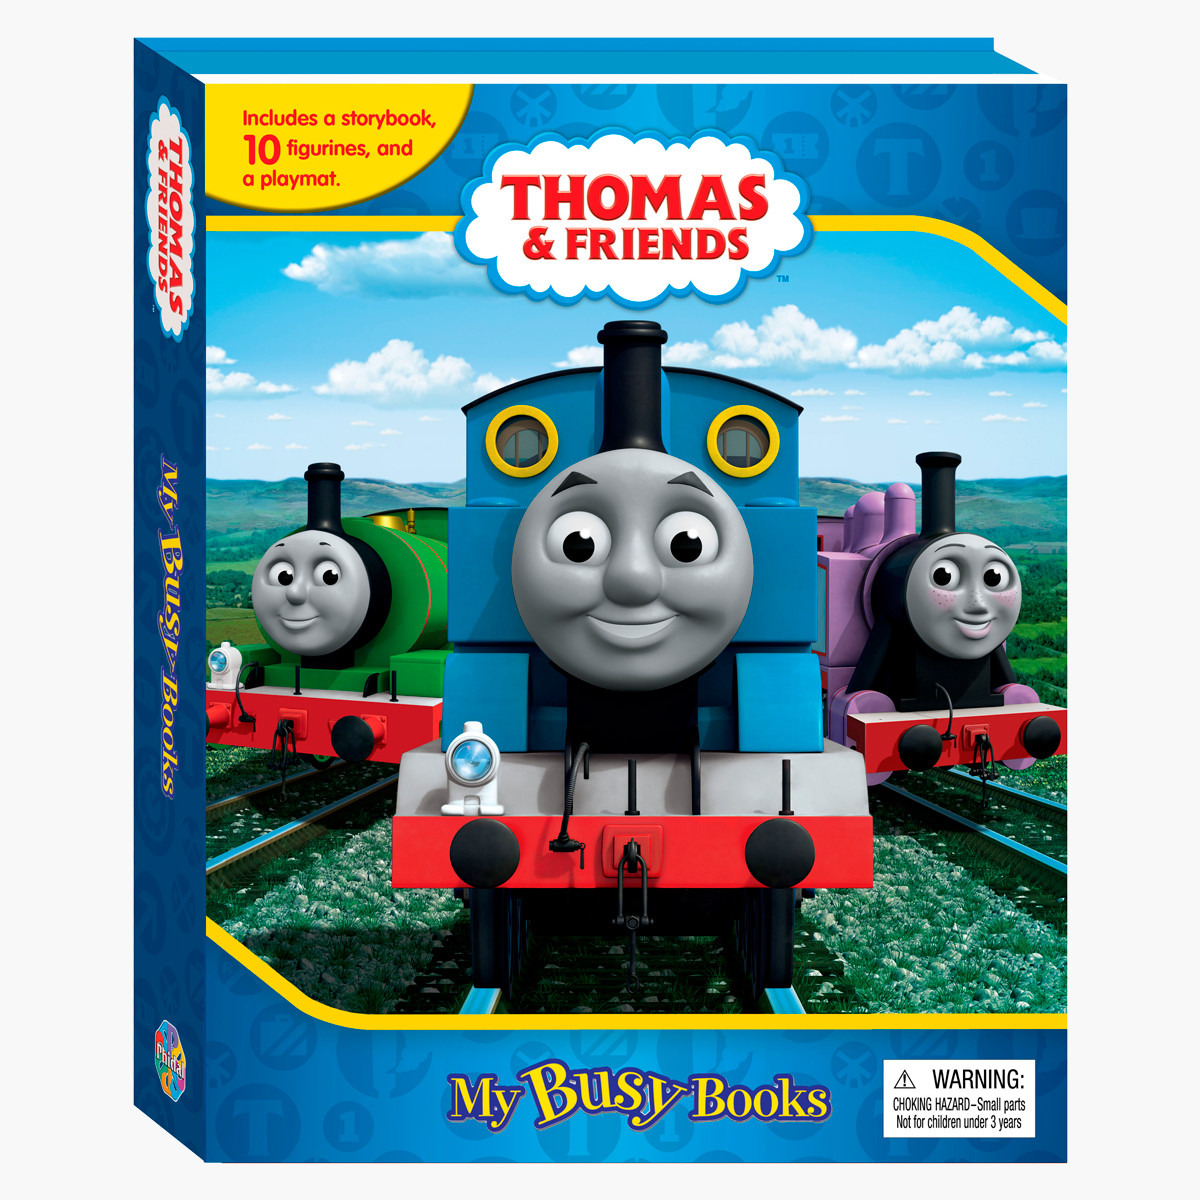 Thomas　Babies　Buy　Centrepoint　Busy　My　for　Friends　Phidal　Bahrain　and　Books　Online　in